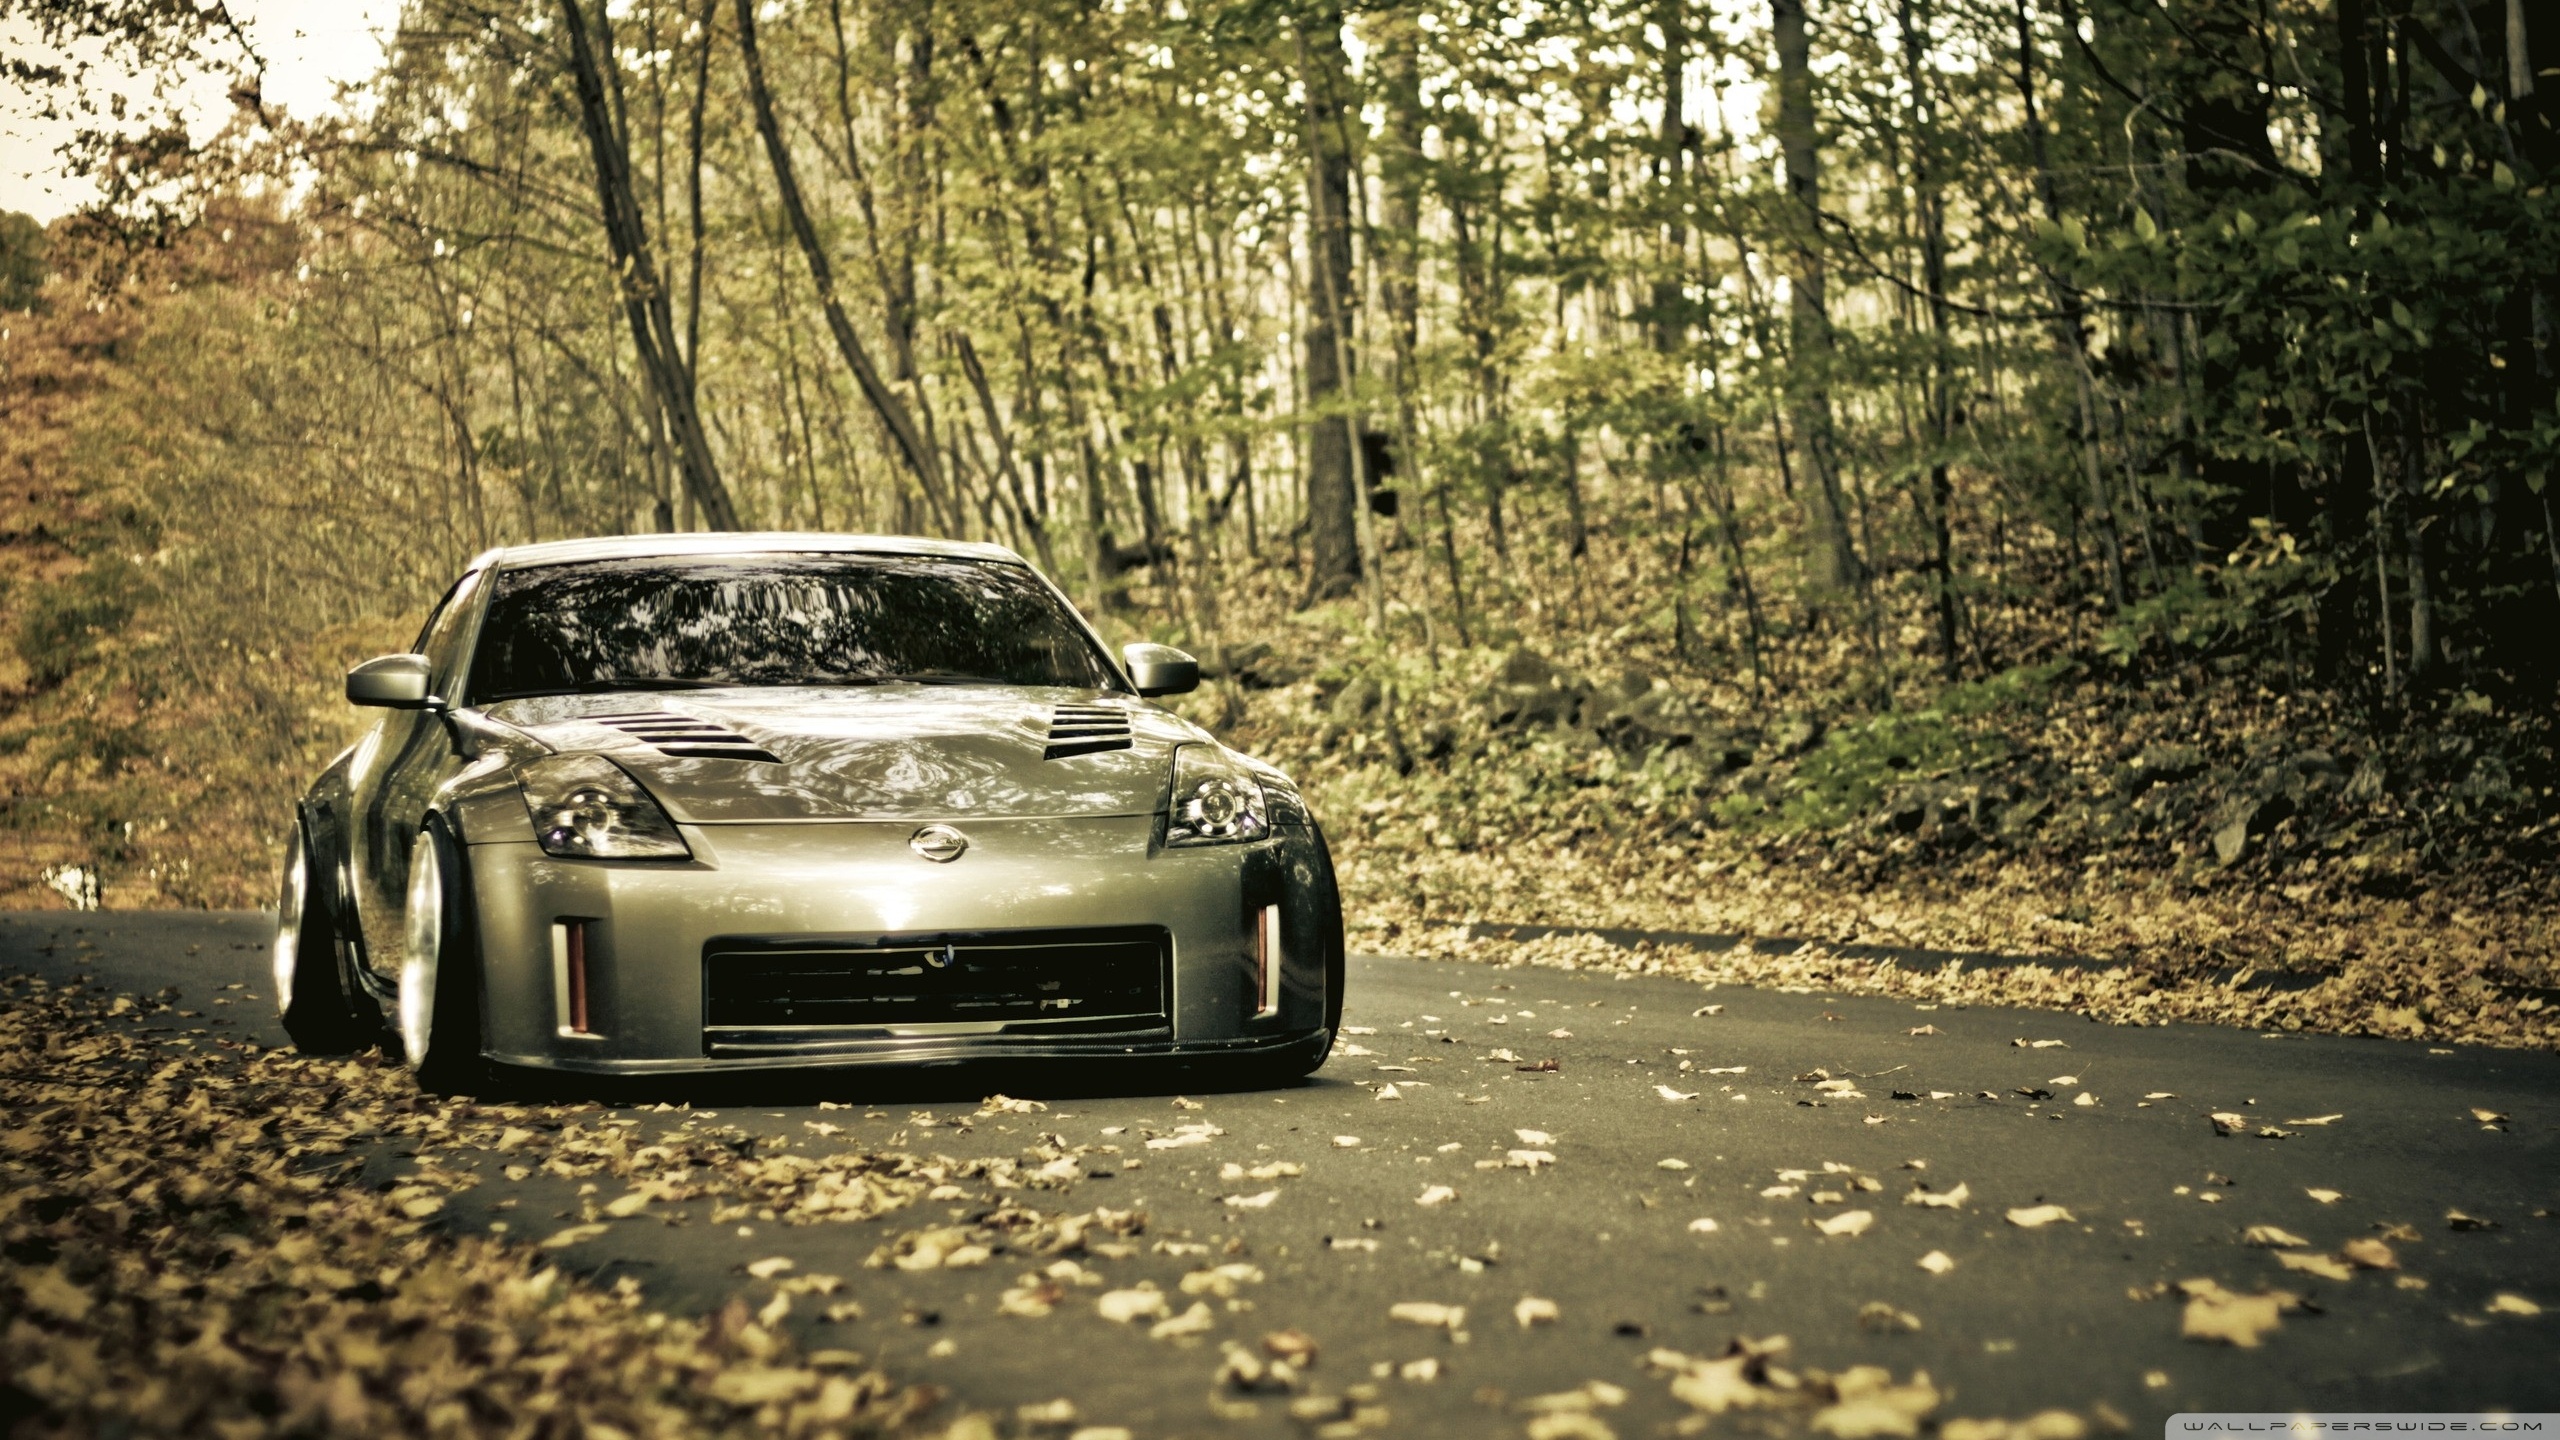 Nissan 350Z Wallpapers and Background Images   stmednet 2560x1440